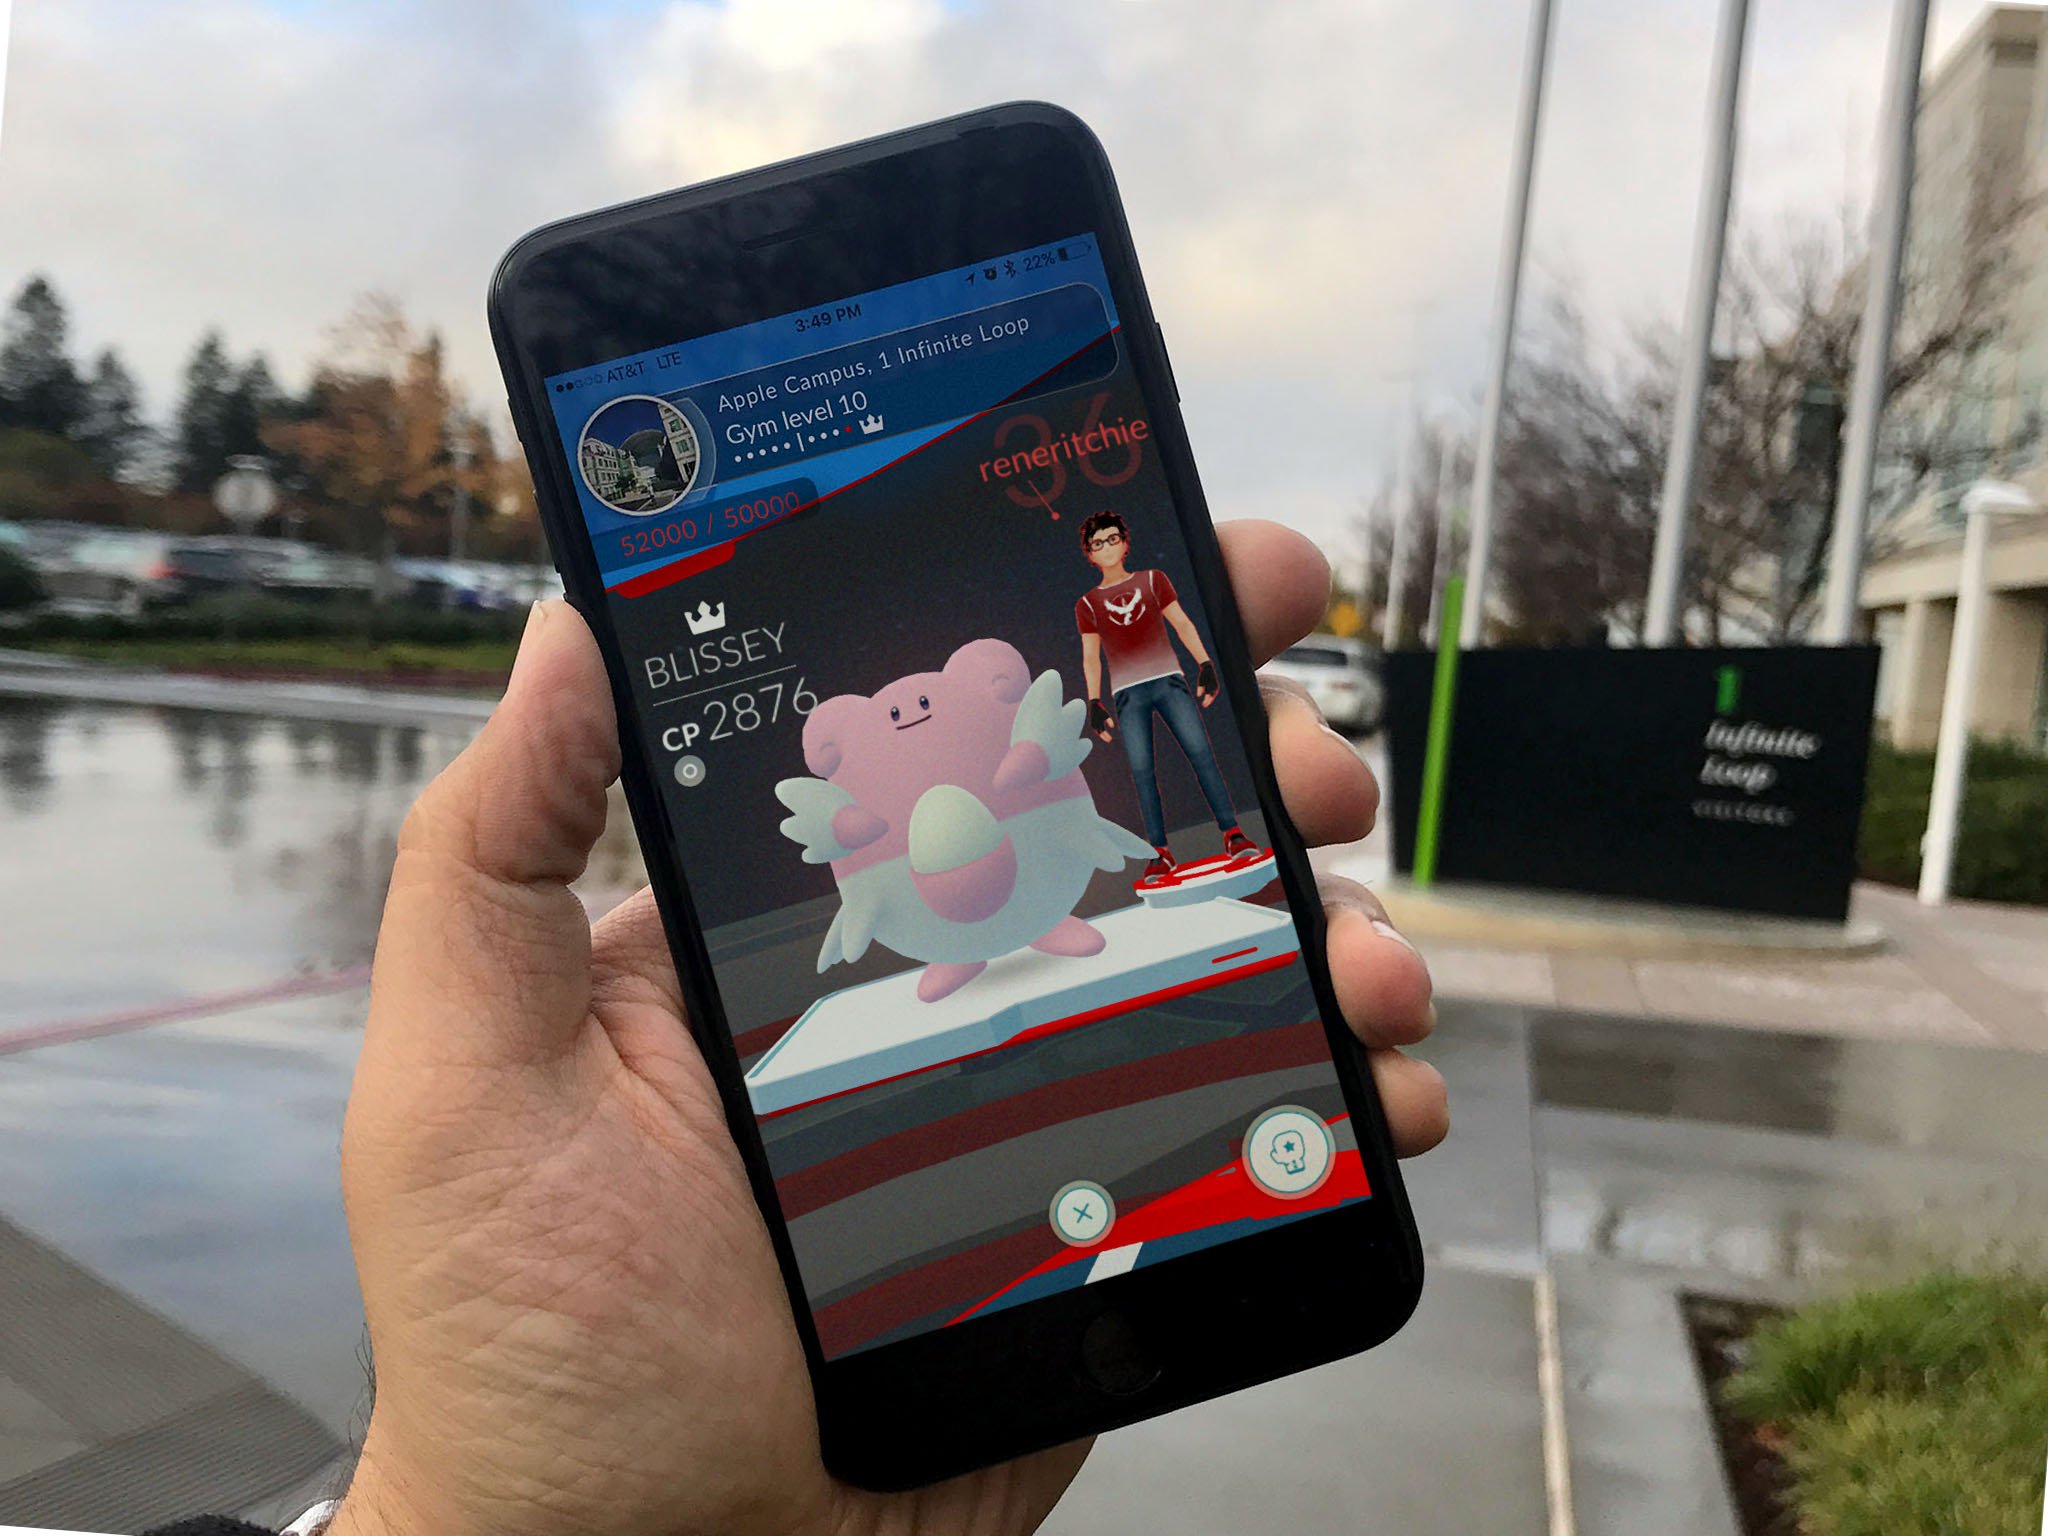 Best Pokémon to evolve and power up in Pokémon Go — Updated for Gen 2!